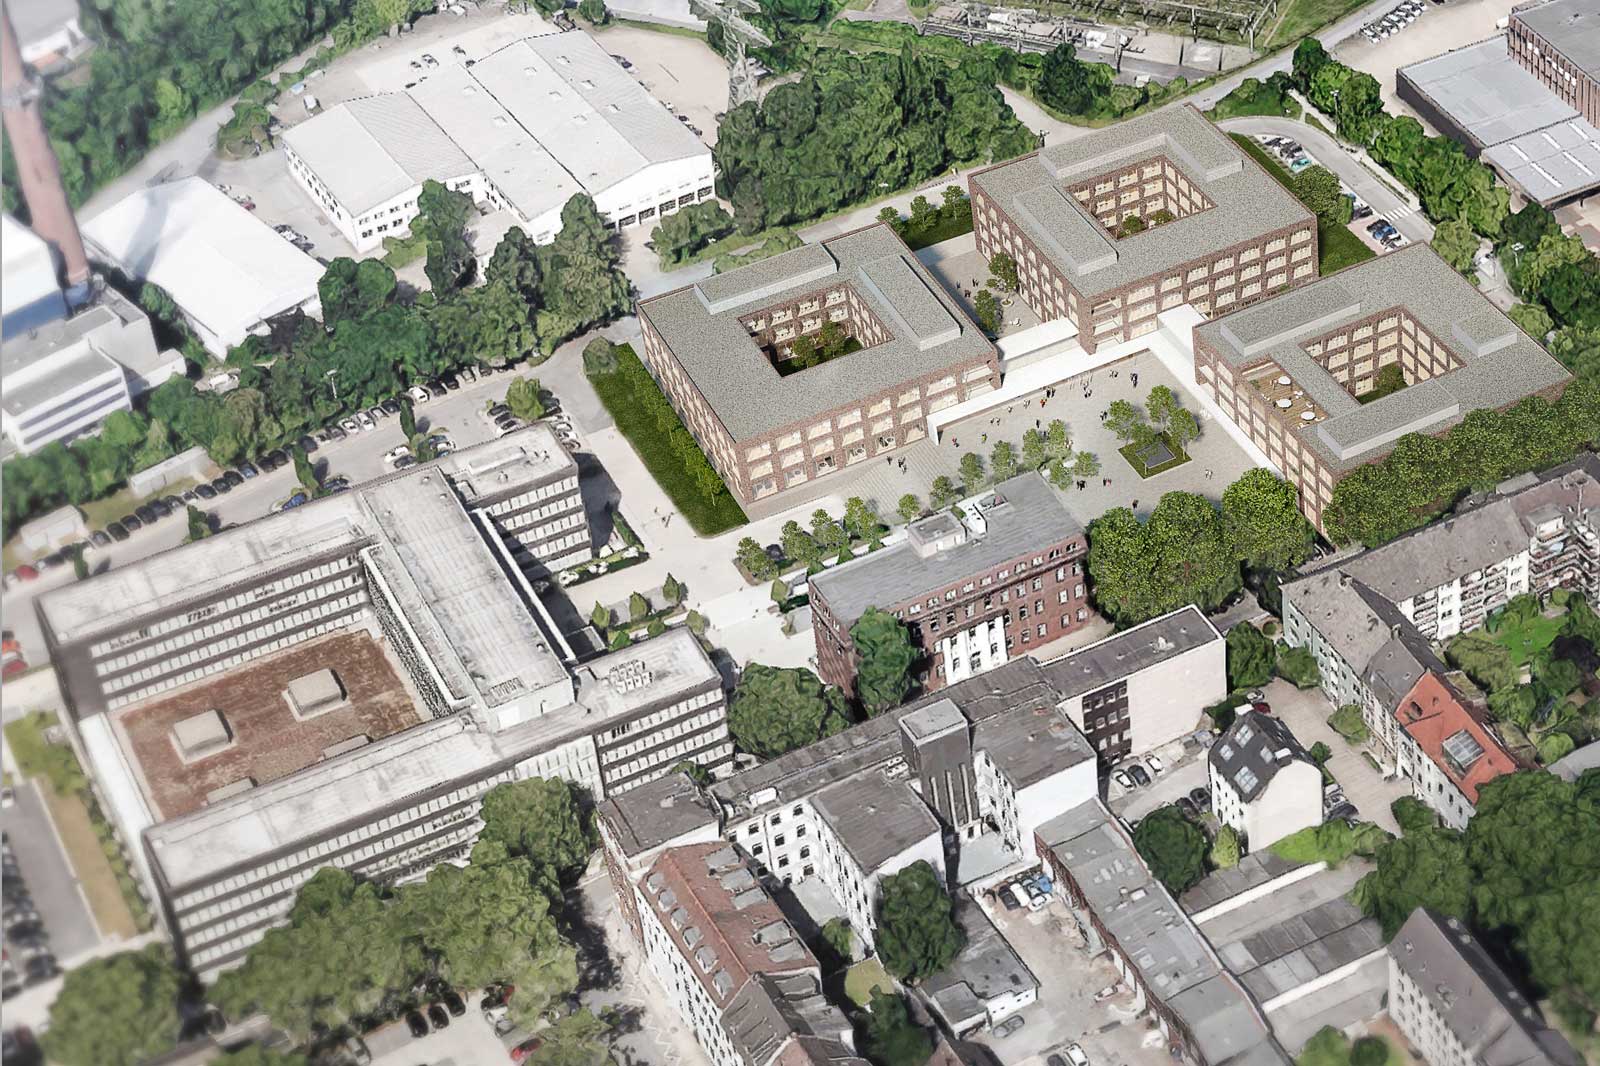 Simulation of the RWE Campus in Essen, from 2020